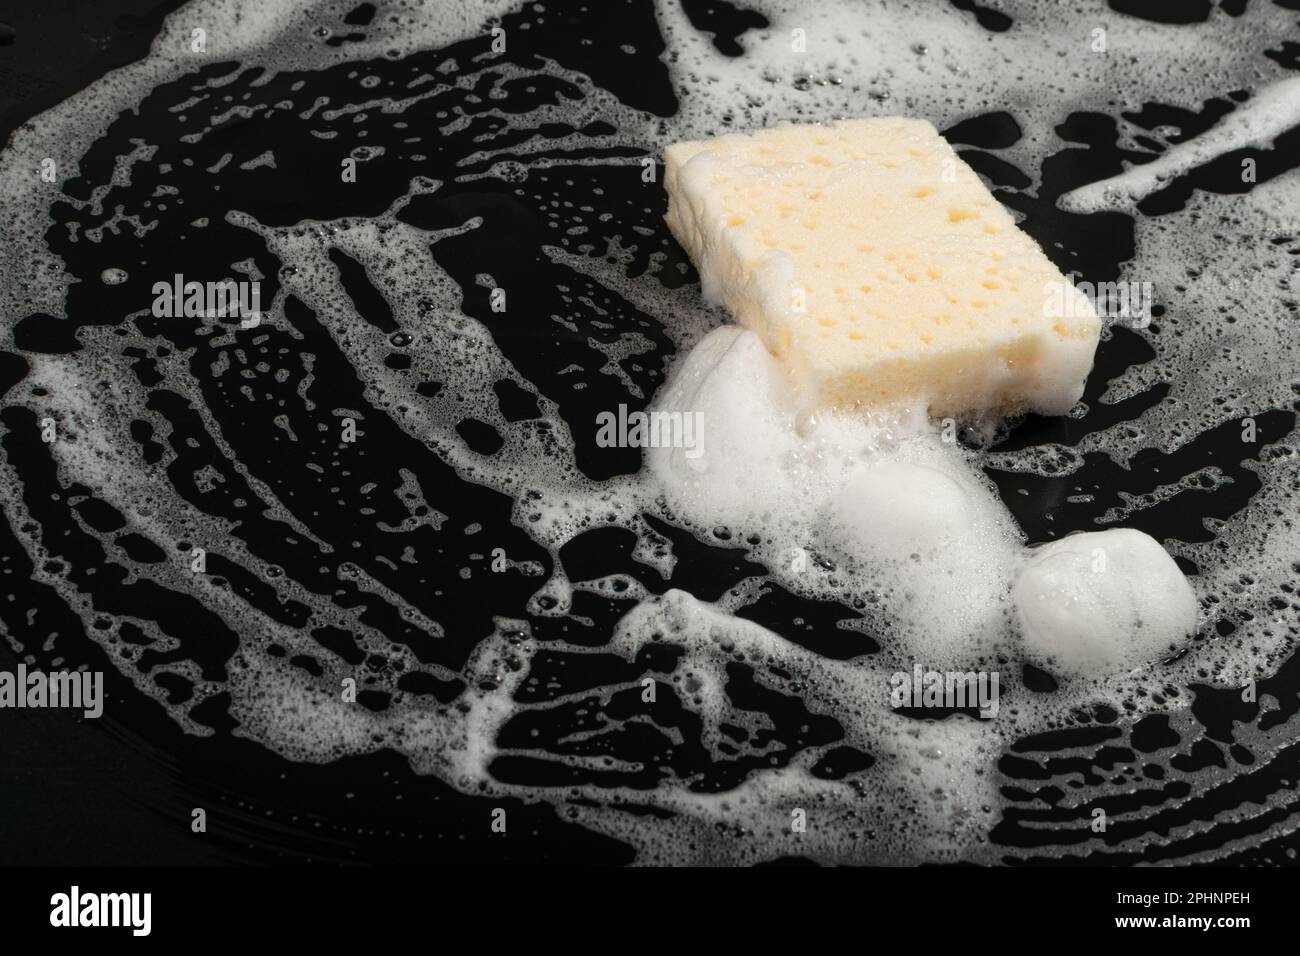 Natural Soapy Sponge with Foam, Eco Brown Sponges, Eco Friendly Hygiene Accessory, Scotch Brite Dishwasher on Black Background, Copy Space Stock Photo